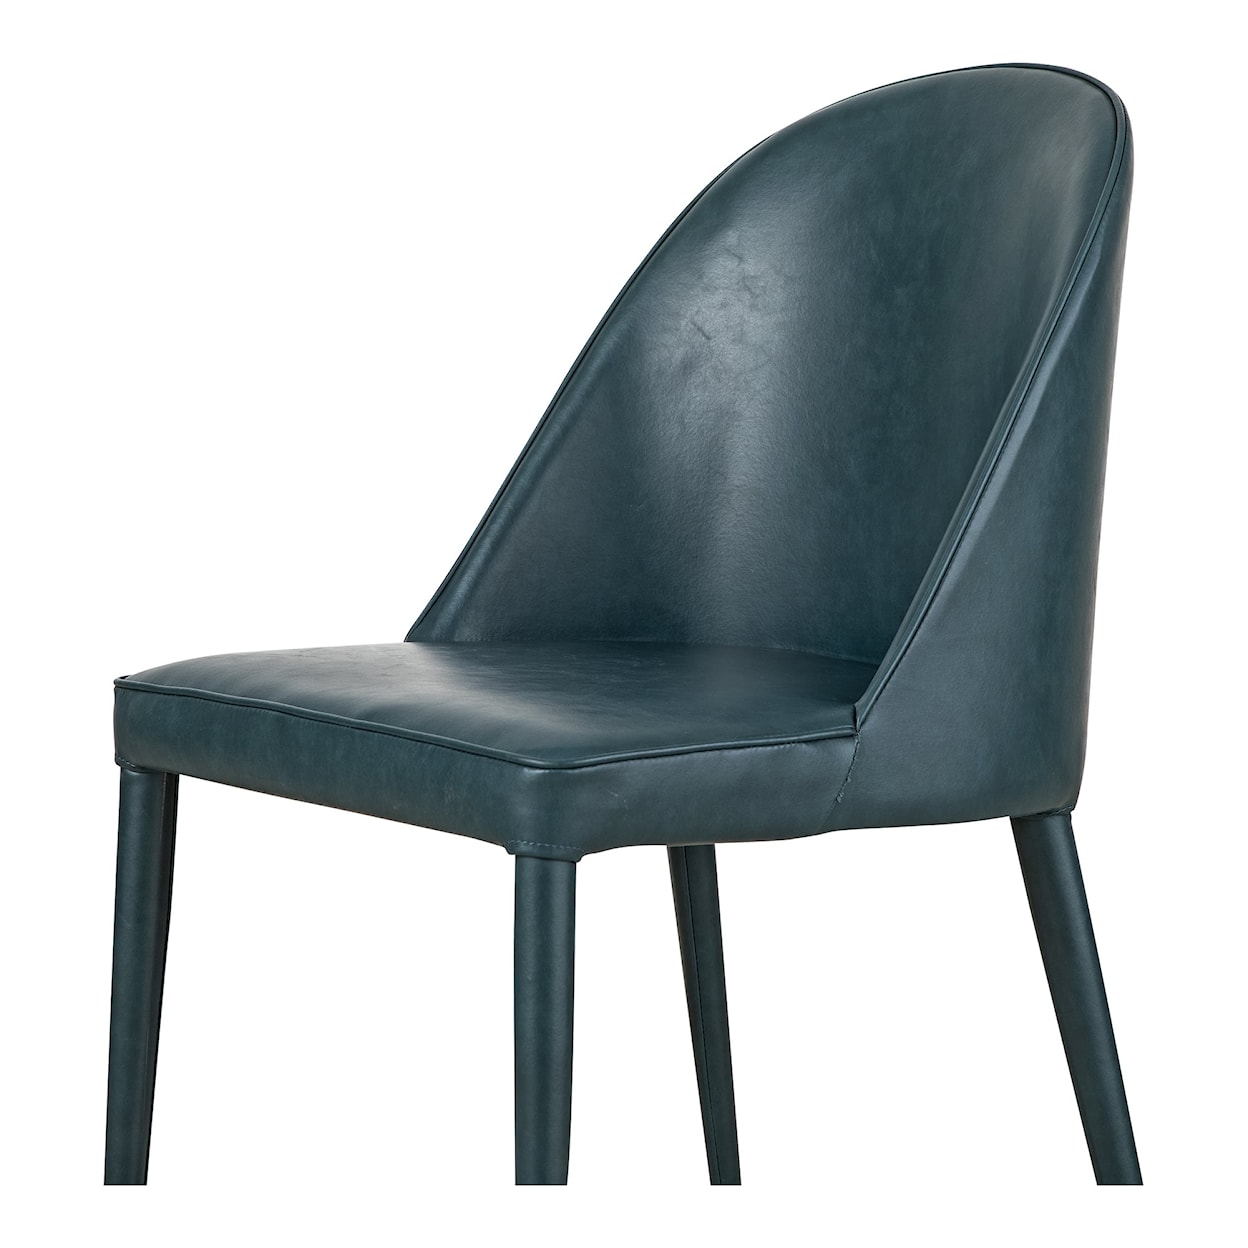 Moe's Home Collection Burton Vegan Leather Dining Chair